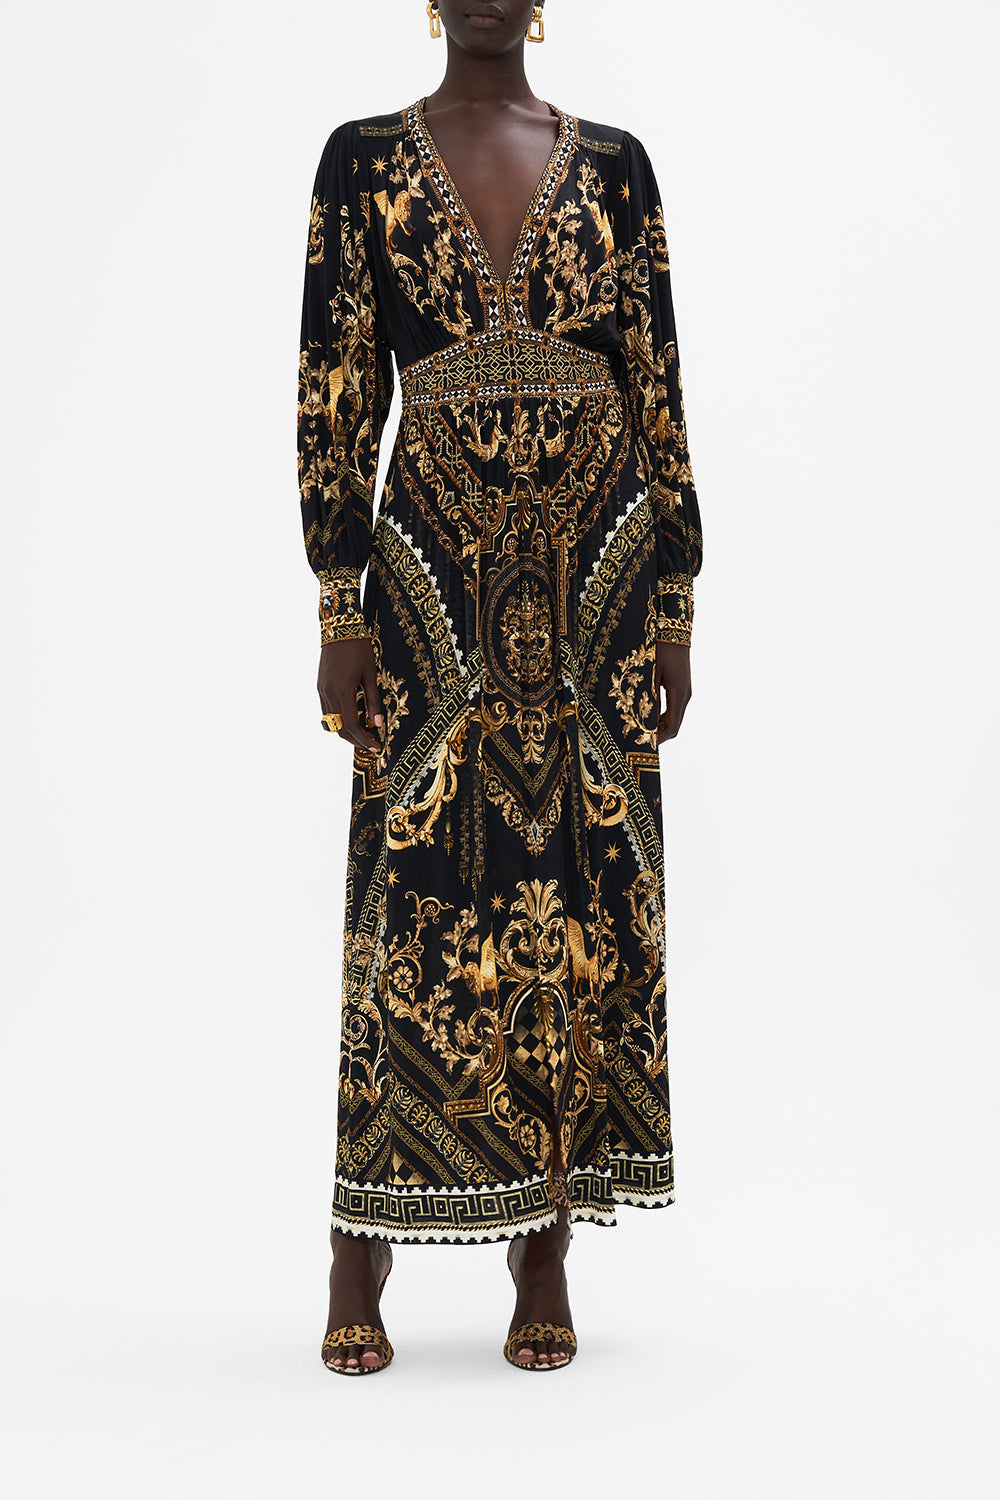 Front view of model wearing CAMILLA black and gold maxi dress in Duomo Dynasty print